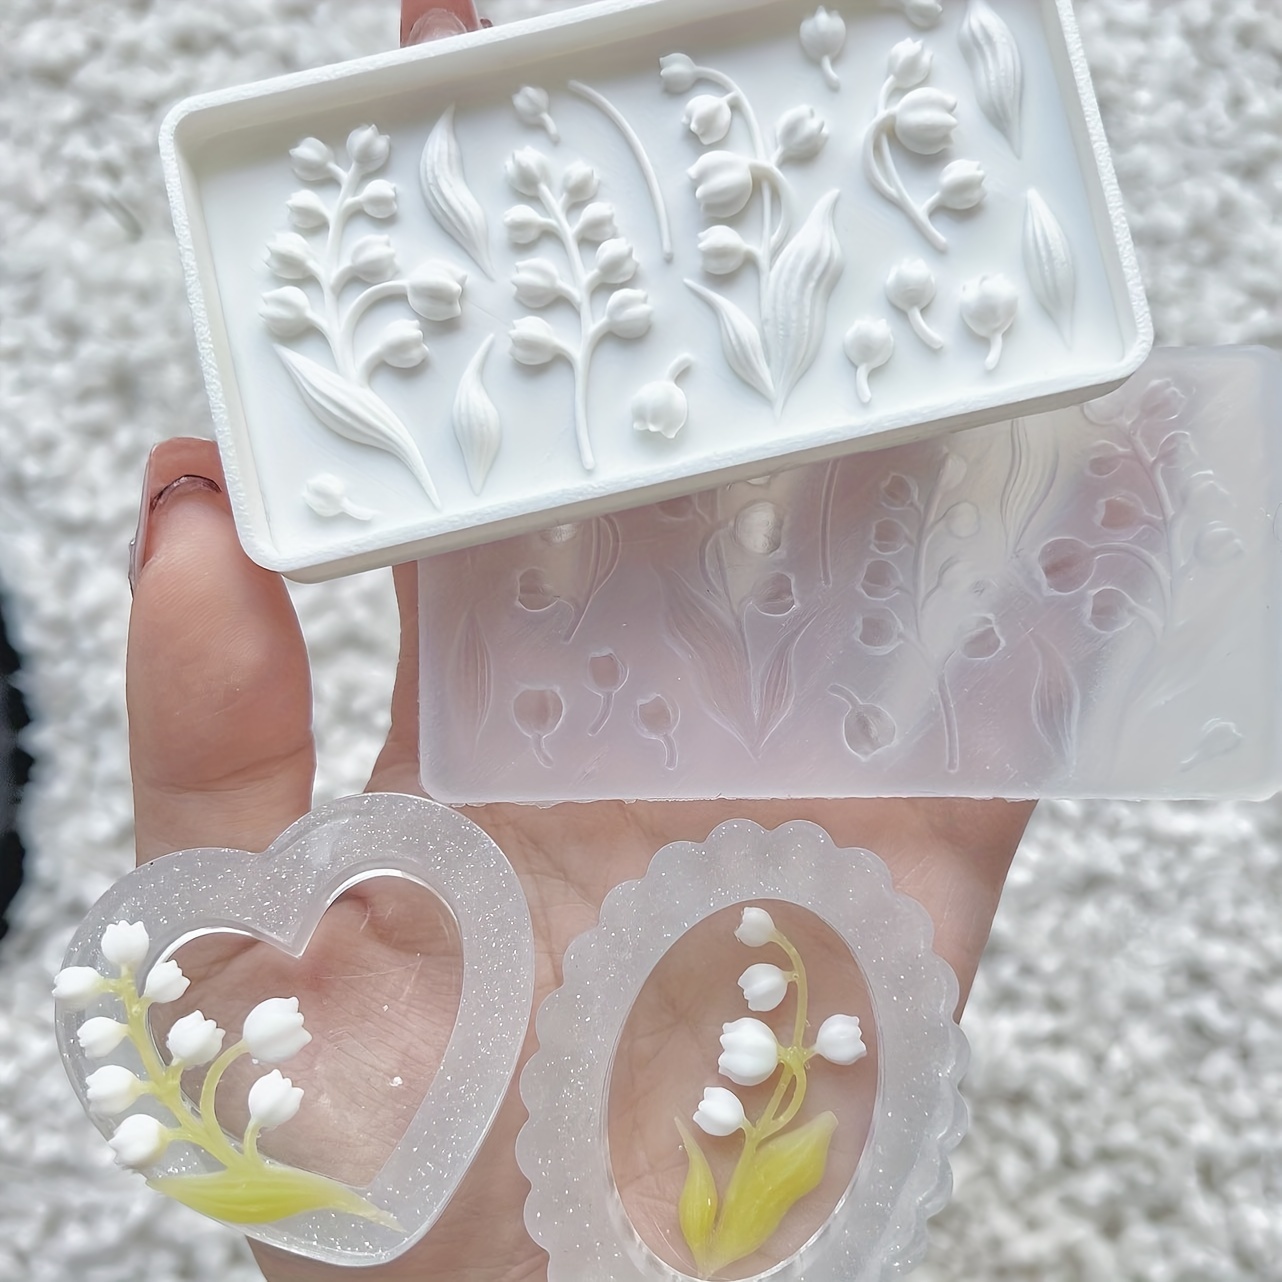 

Lily Of The Valley Pendant & Frame Decor Accessories Epoxy Resin Mold Set, Silicone Keychain Casting Molds For Diy Crafts, Jewelry Making, Home Decor